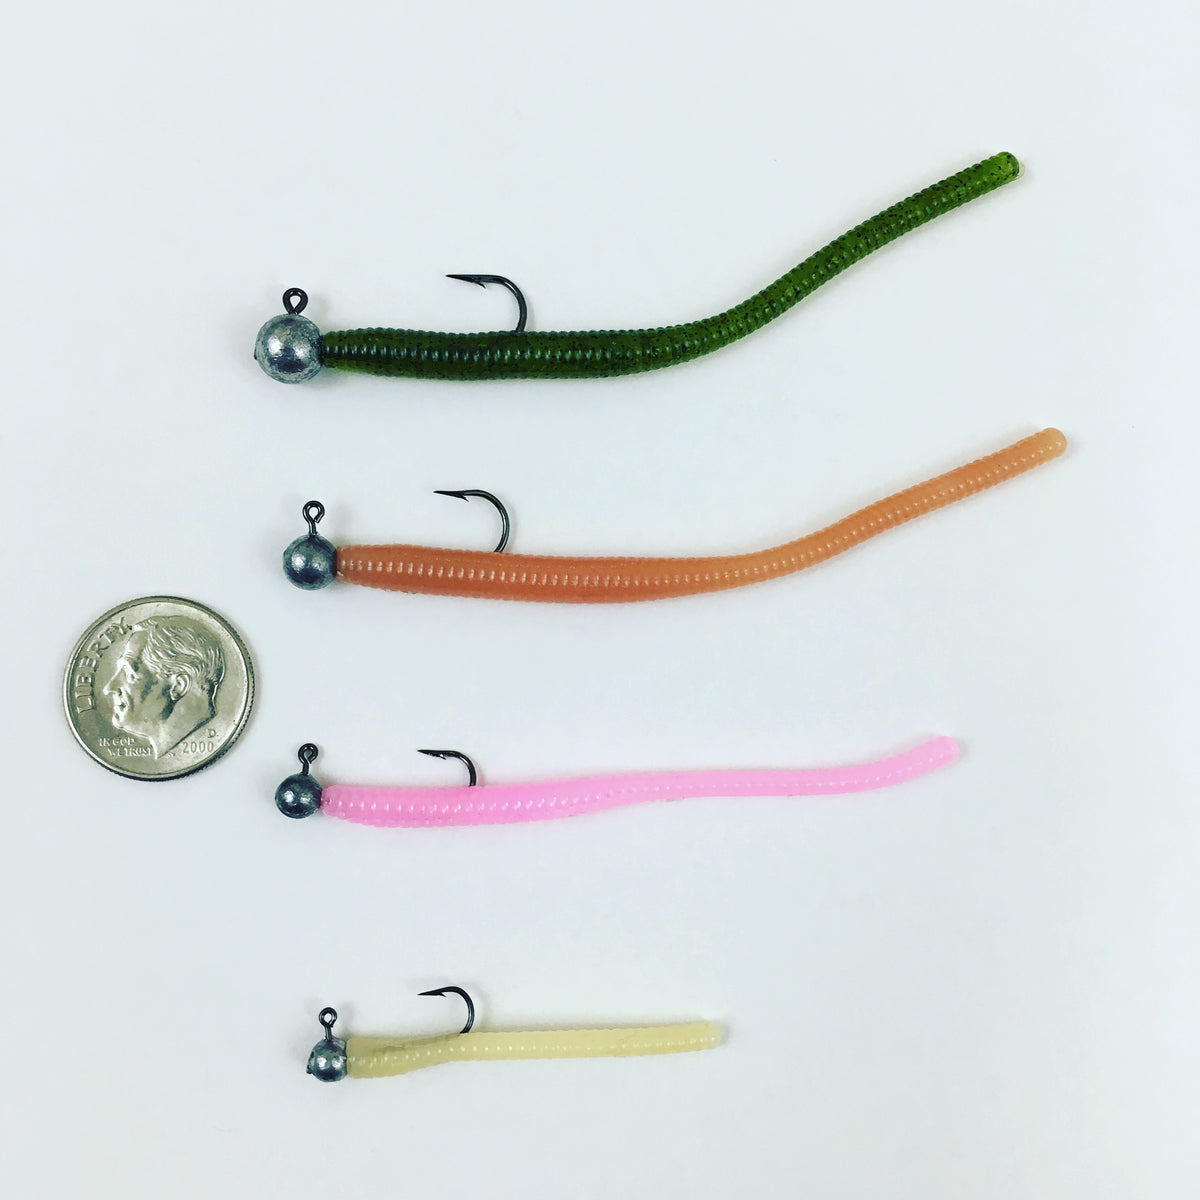 Trout Worms: Nightcrawler – Peter's Custom Trout Worms